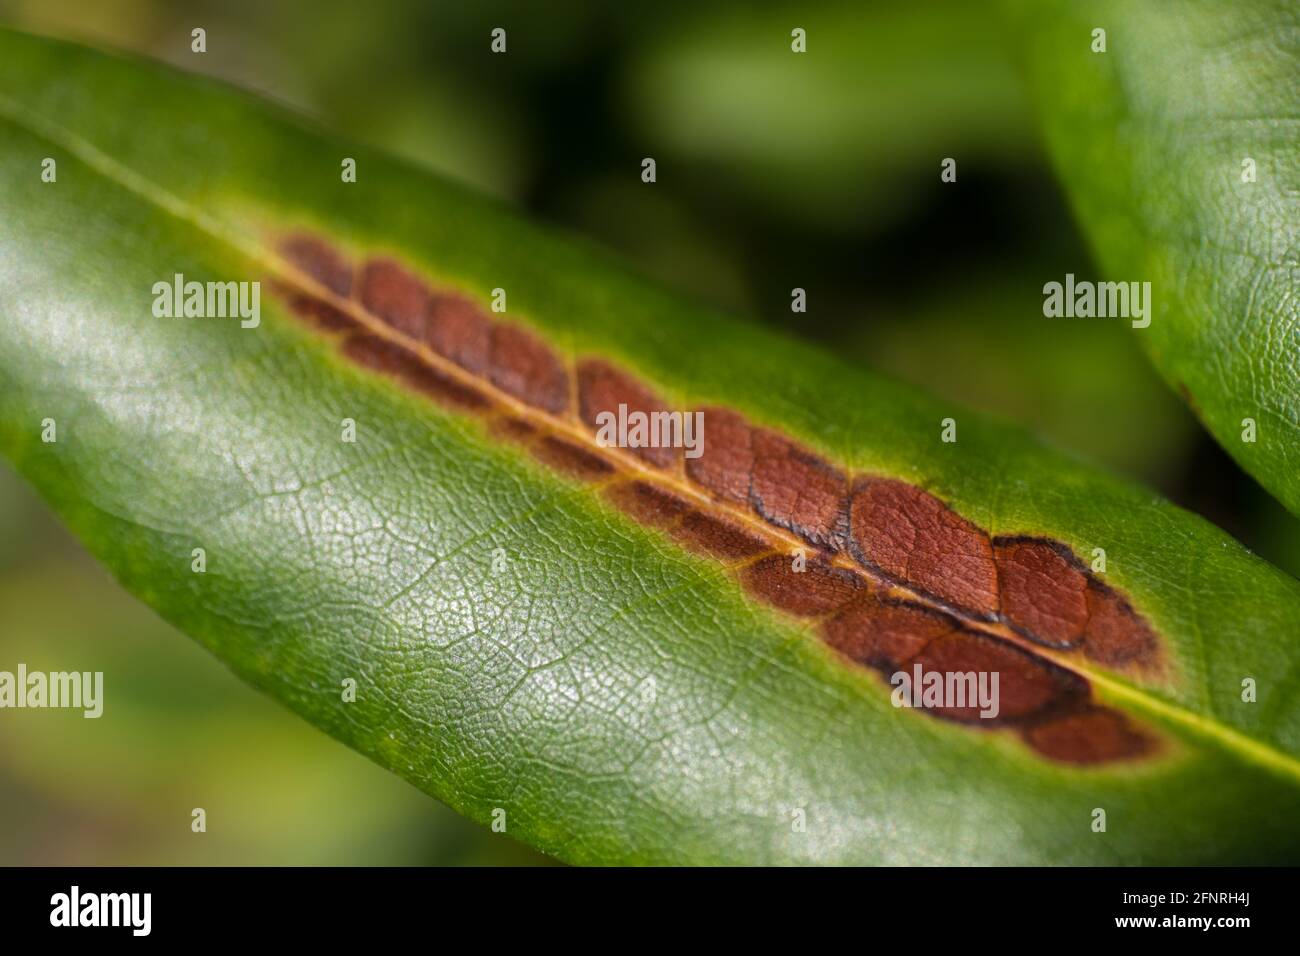 Close-up of a leaf of rhododendron with brown spots caused by fungal diseases Stock Photo